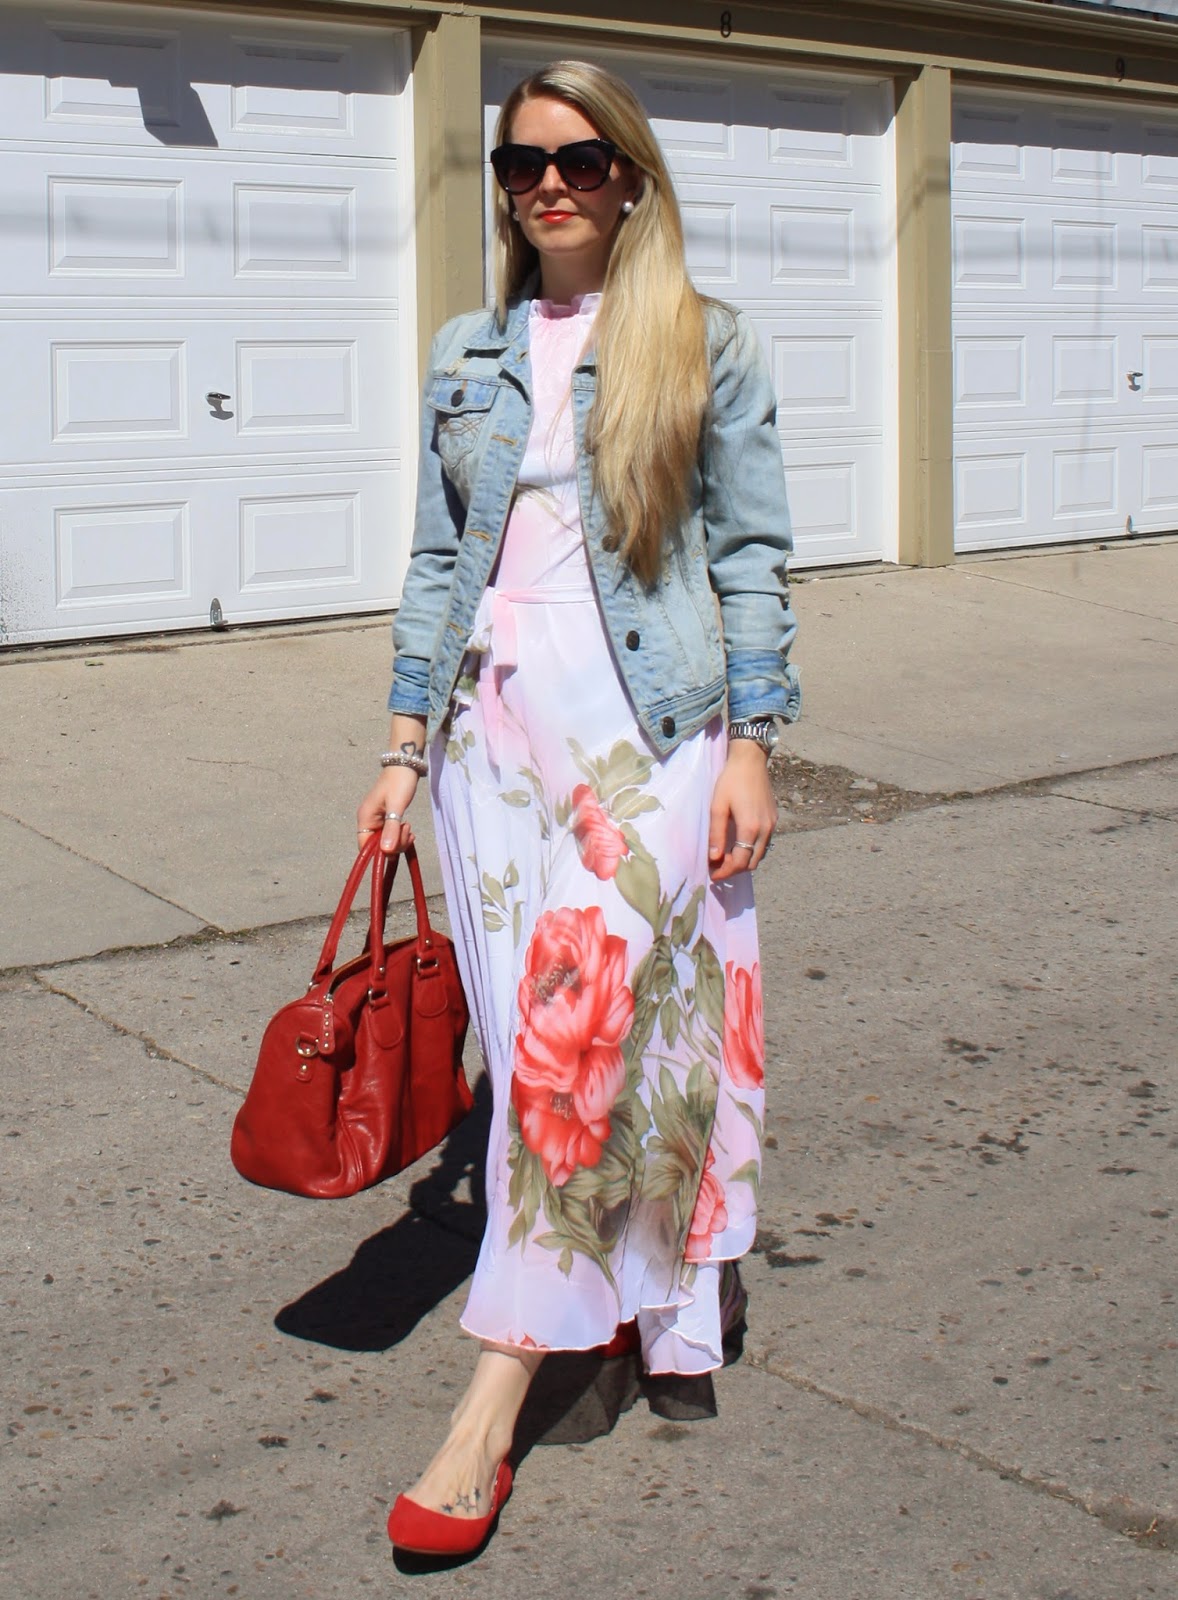 The Electric Dreamer : Red Florals and Red Lips!